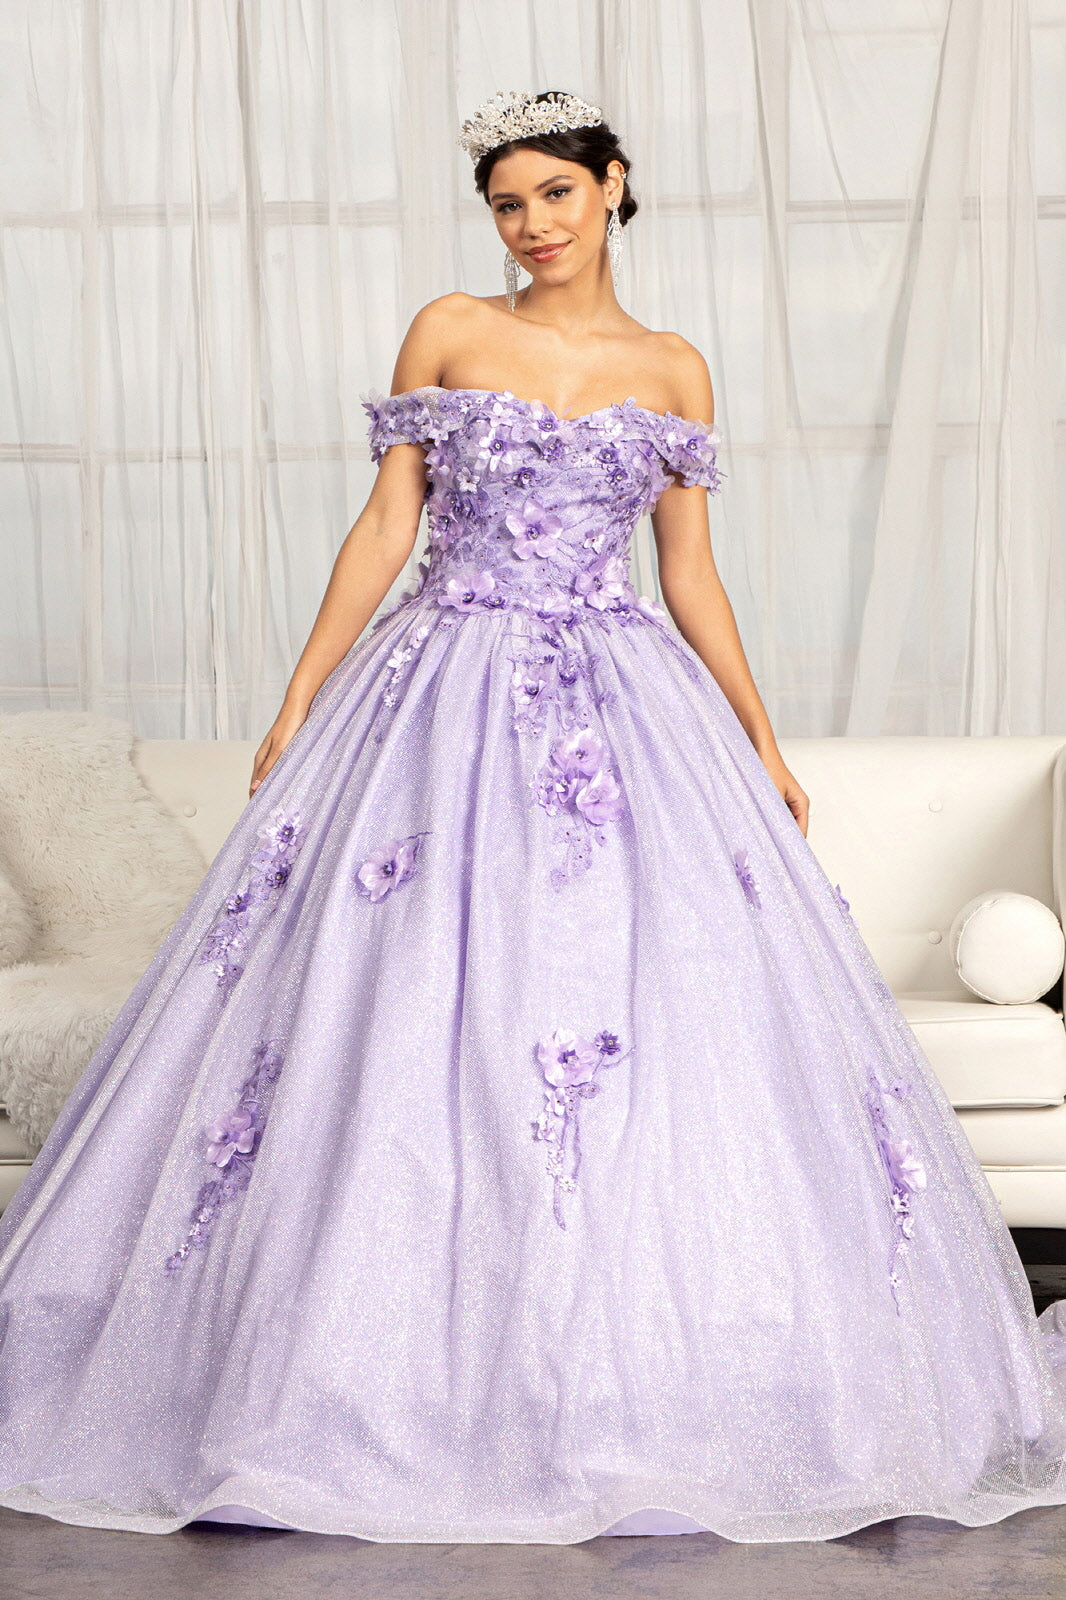 3D Floral Applique and Jewel Embellished Glitter Mesh Quinceanera Dress GLGL1971 Elsy Style QUINCEANERA